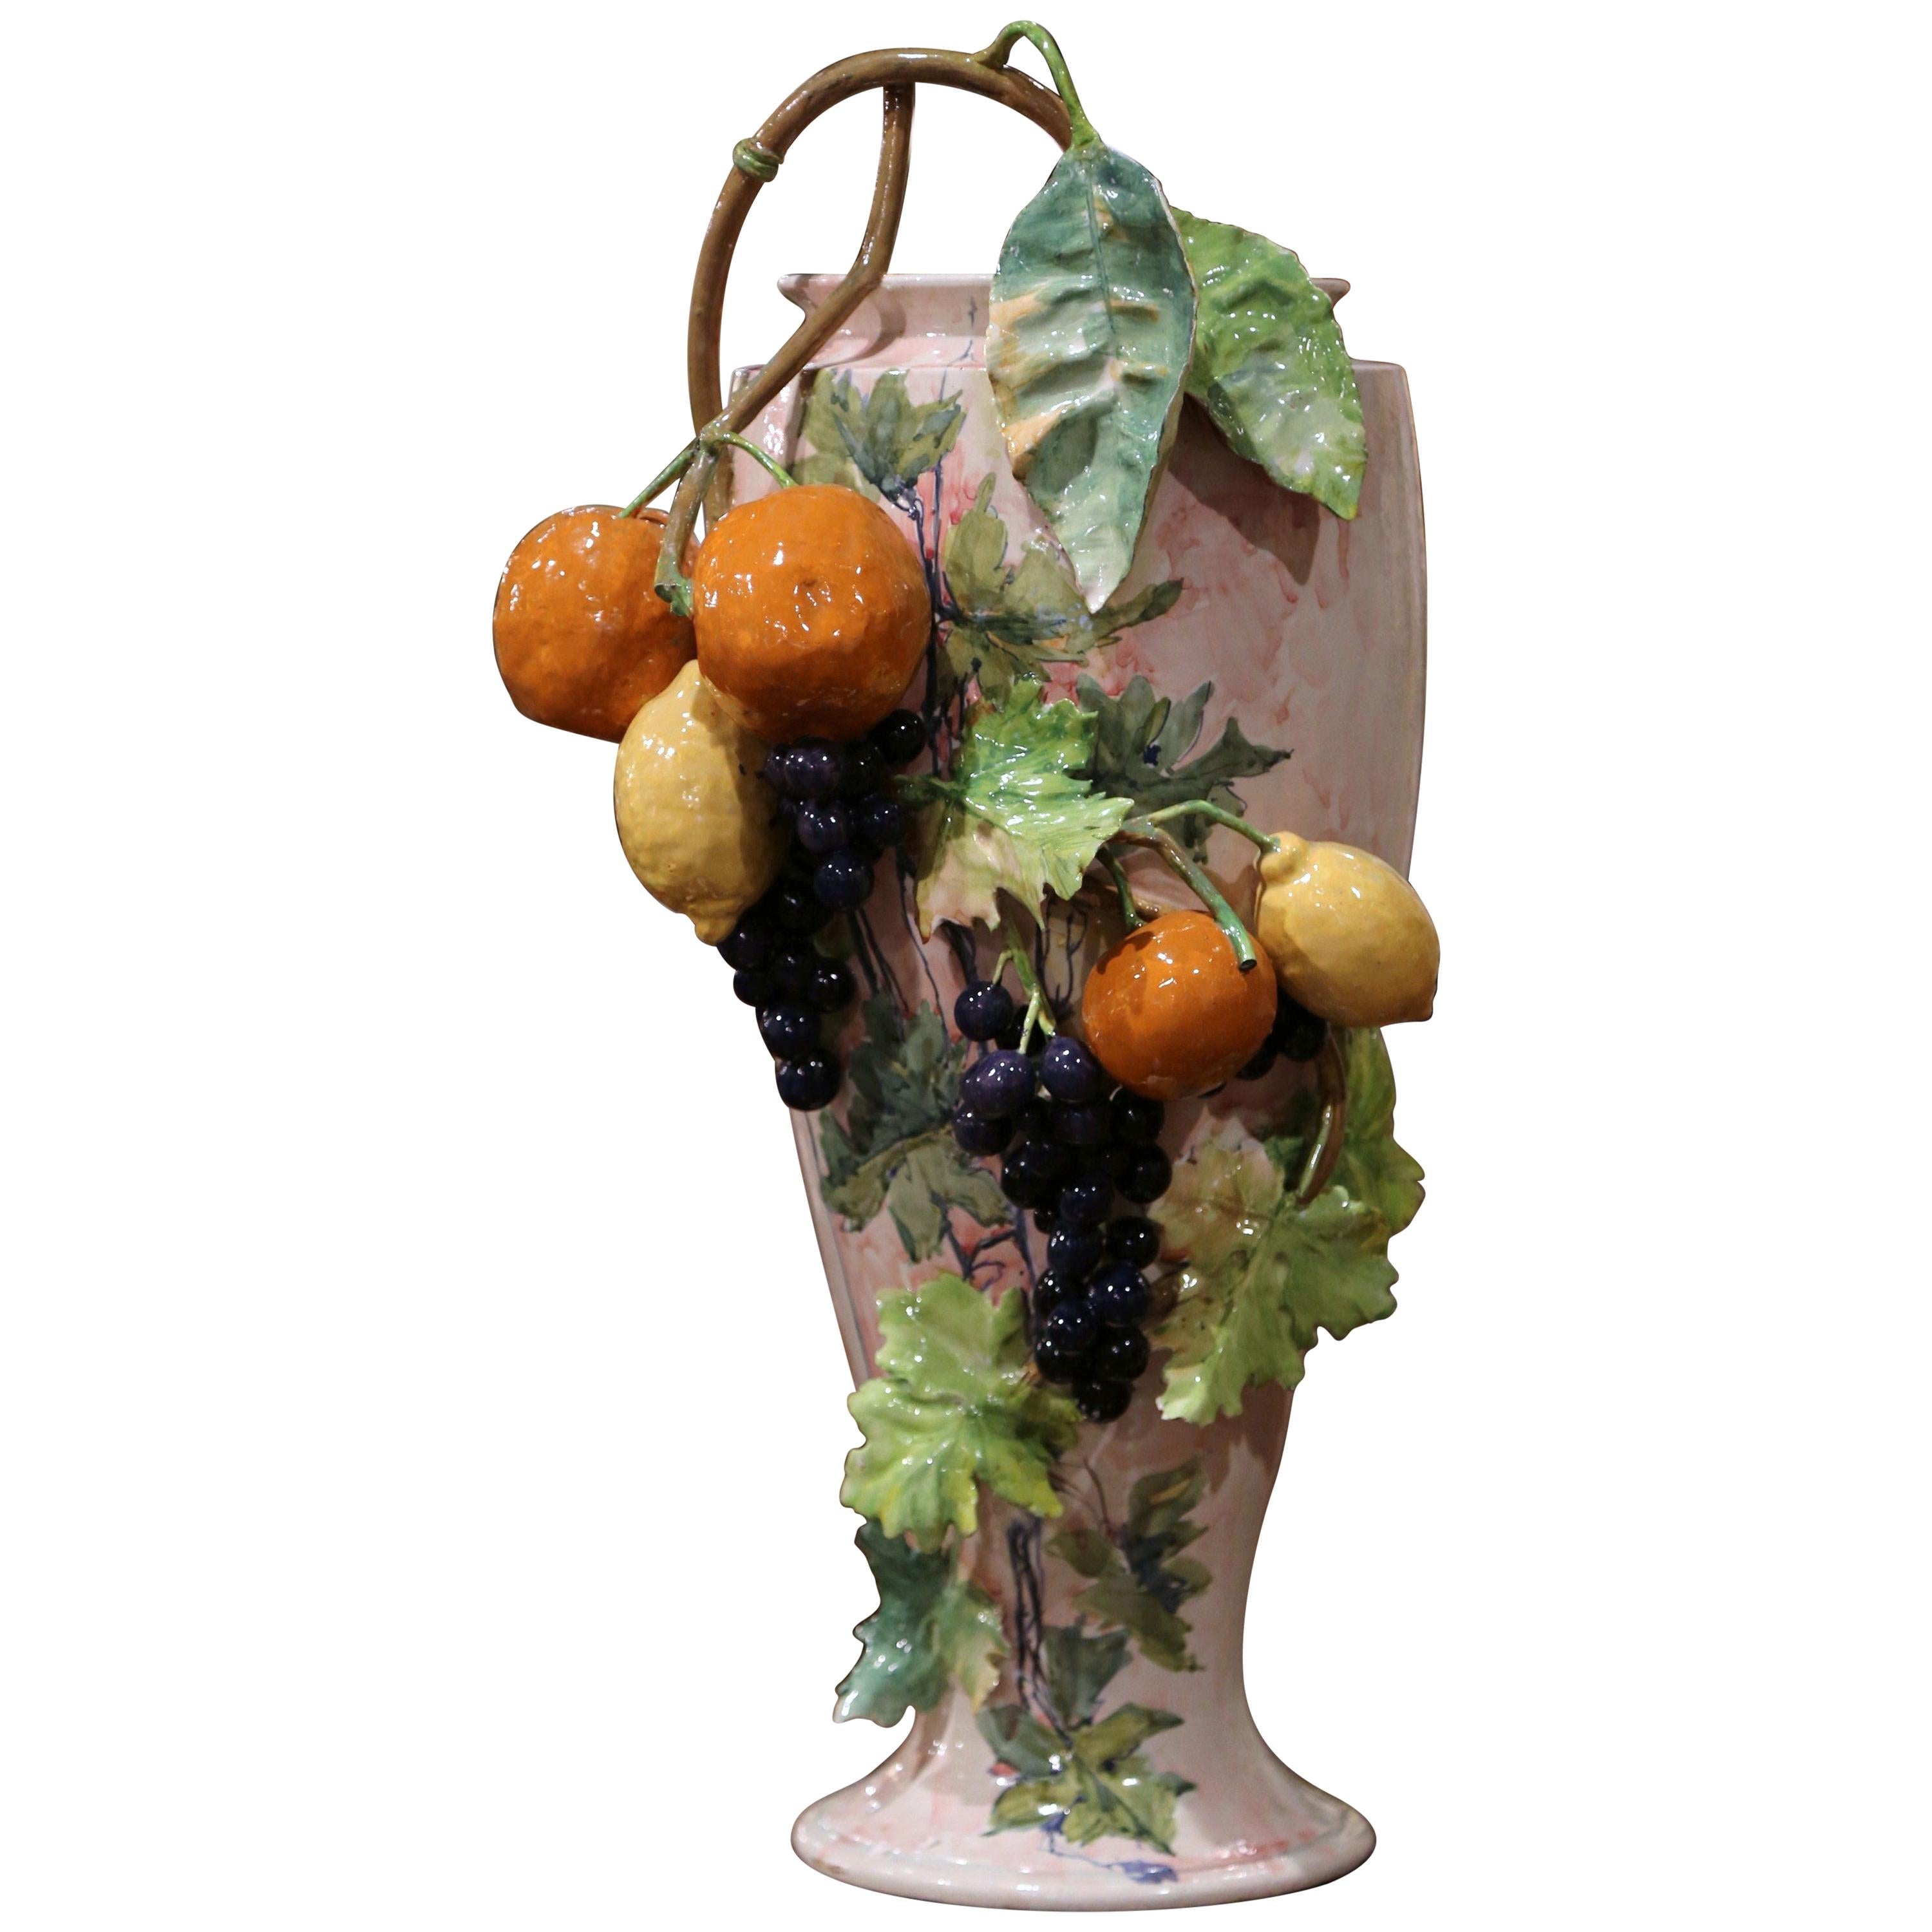 19th Century French Painted Ceramic Barbotine Vase with Fruit and Foliage Decor